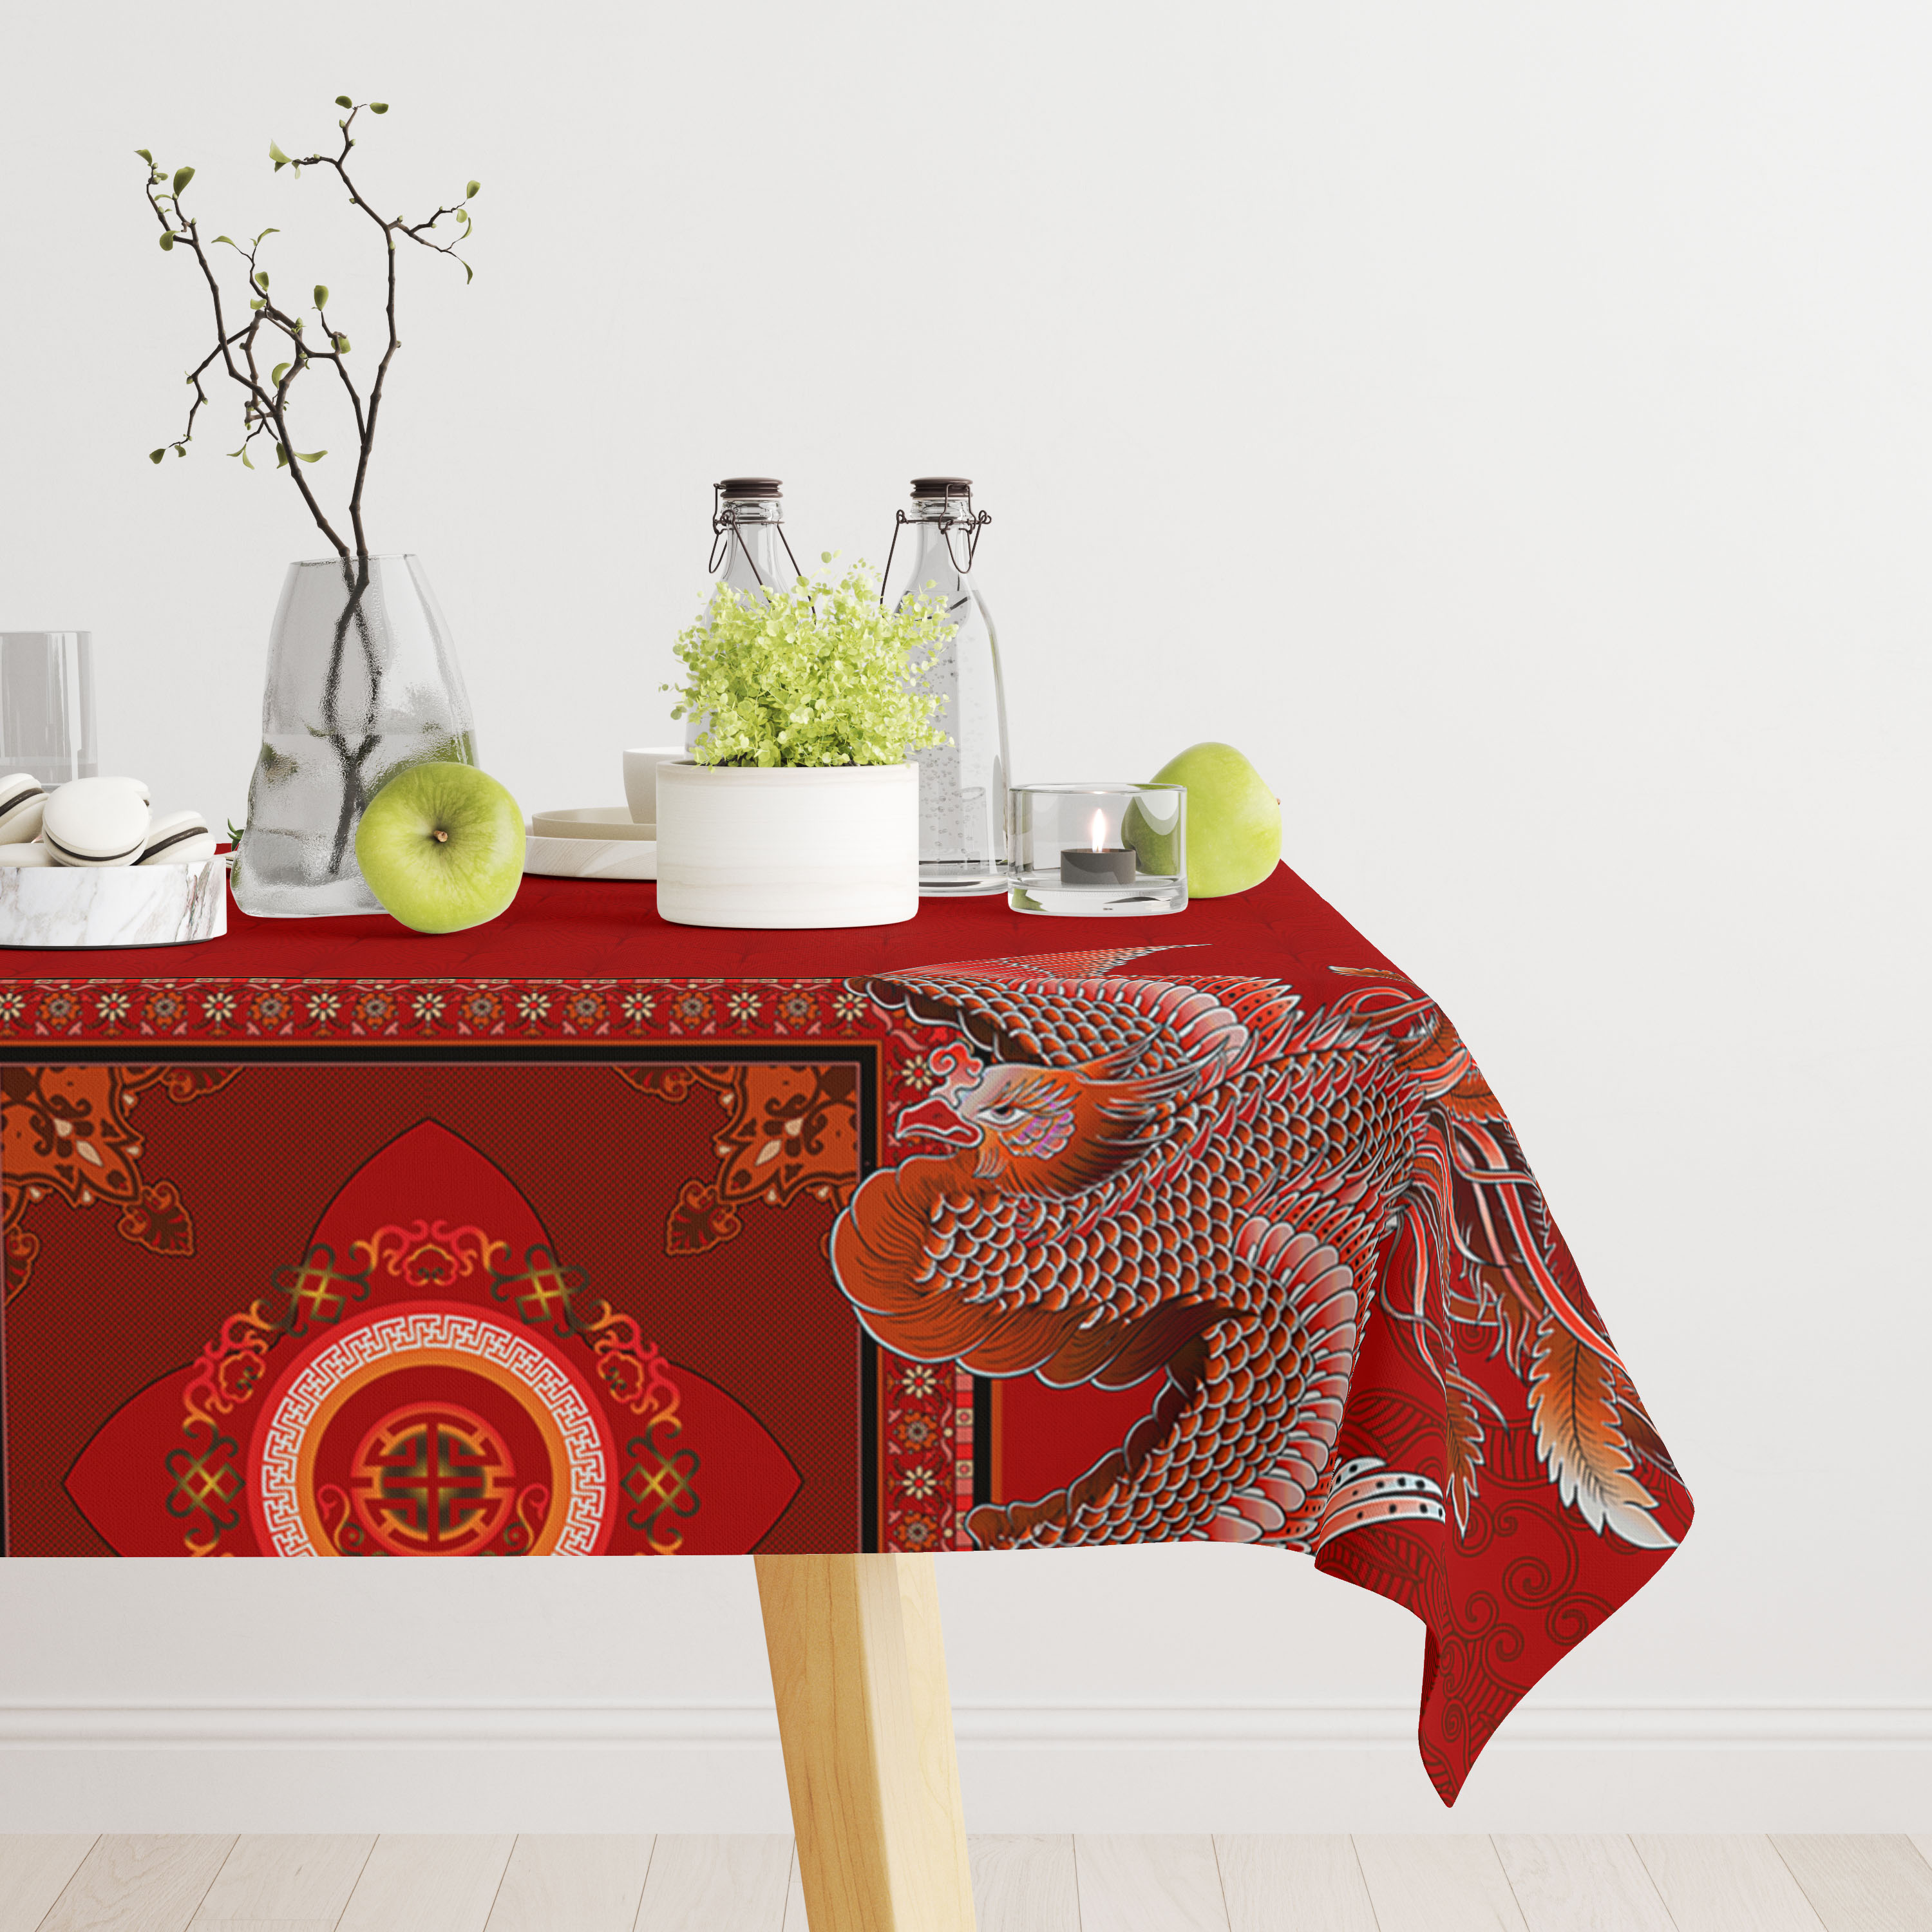 How to Stylishly Decorate With Red and Gold for Chinese New Year